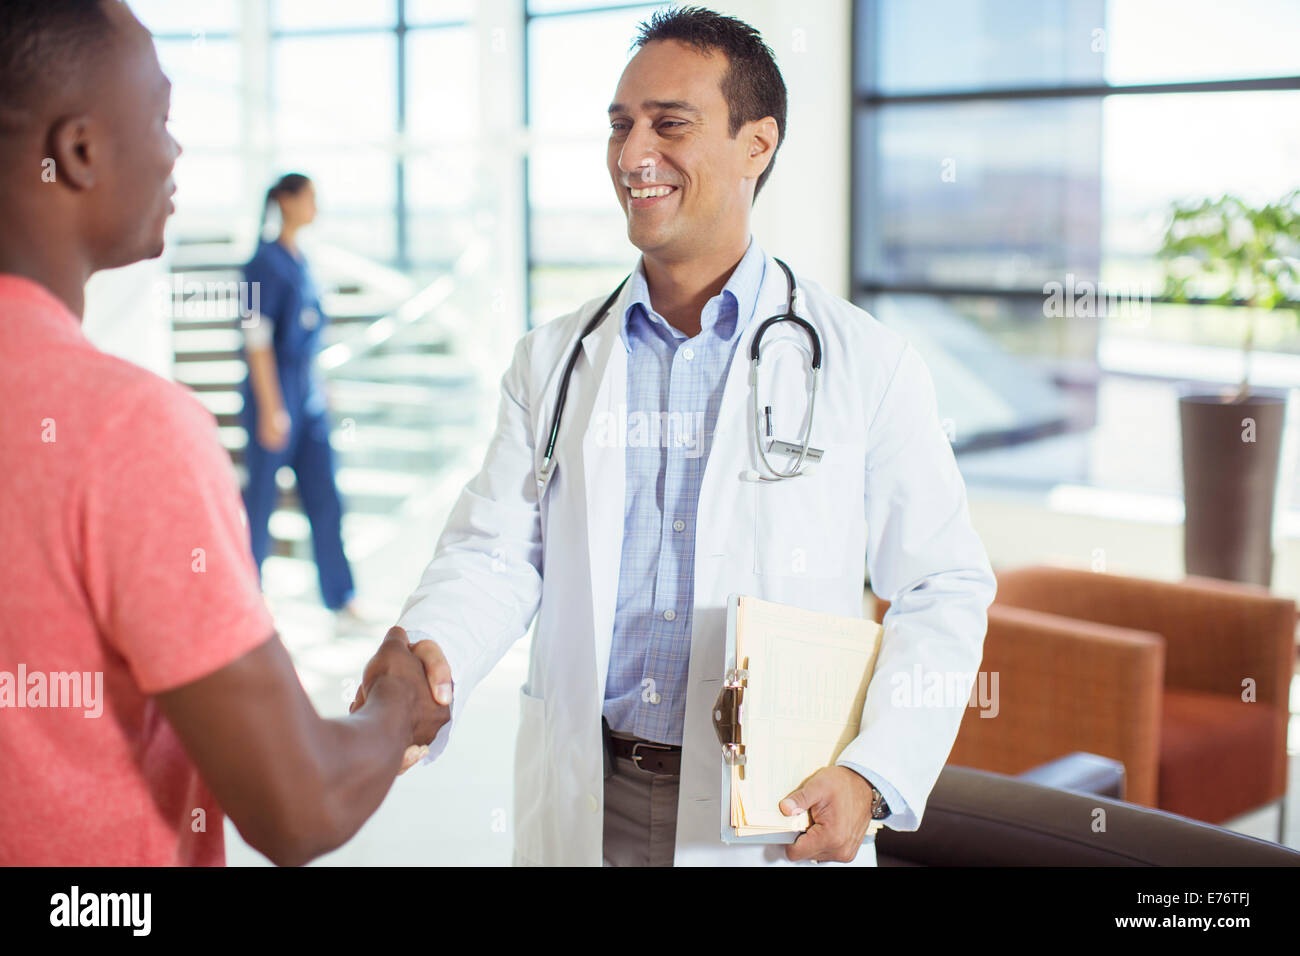 Doctor and patient shaking hands in hospital Stock Photo